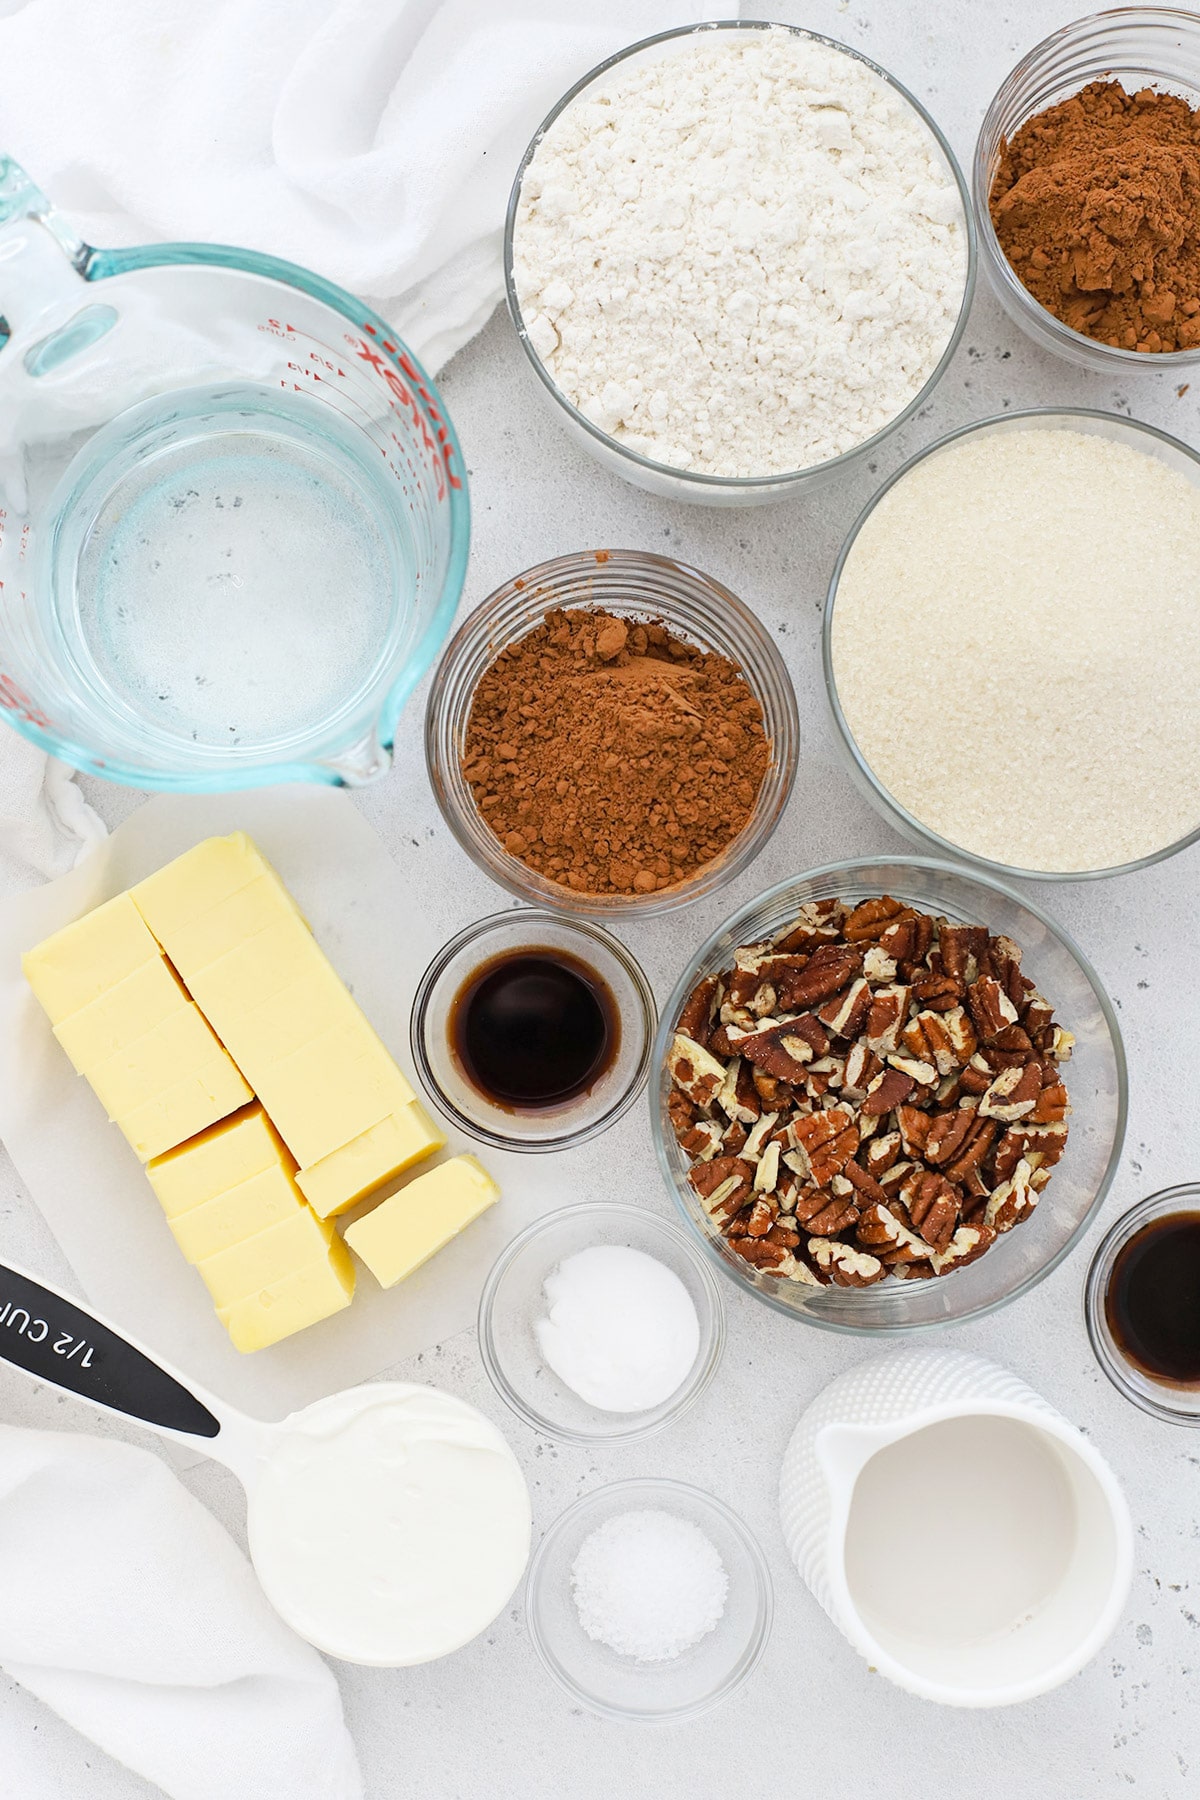 Ingredients for gluten-free texas sheet cake with fudge frosting